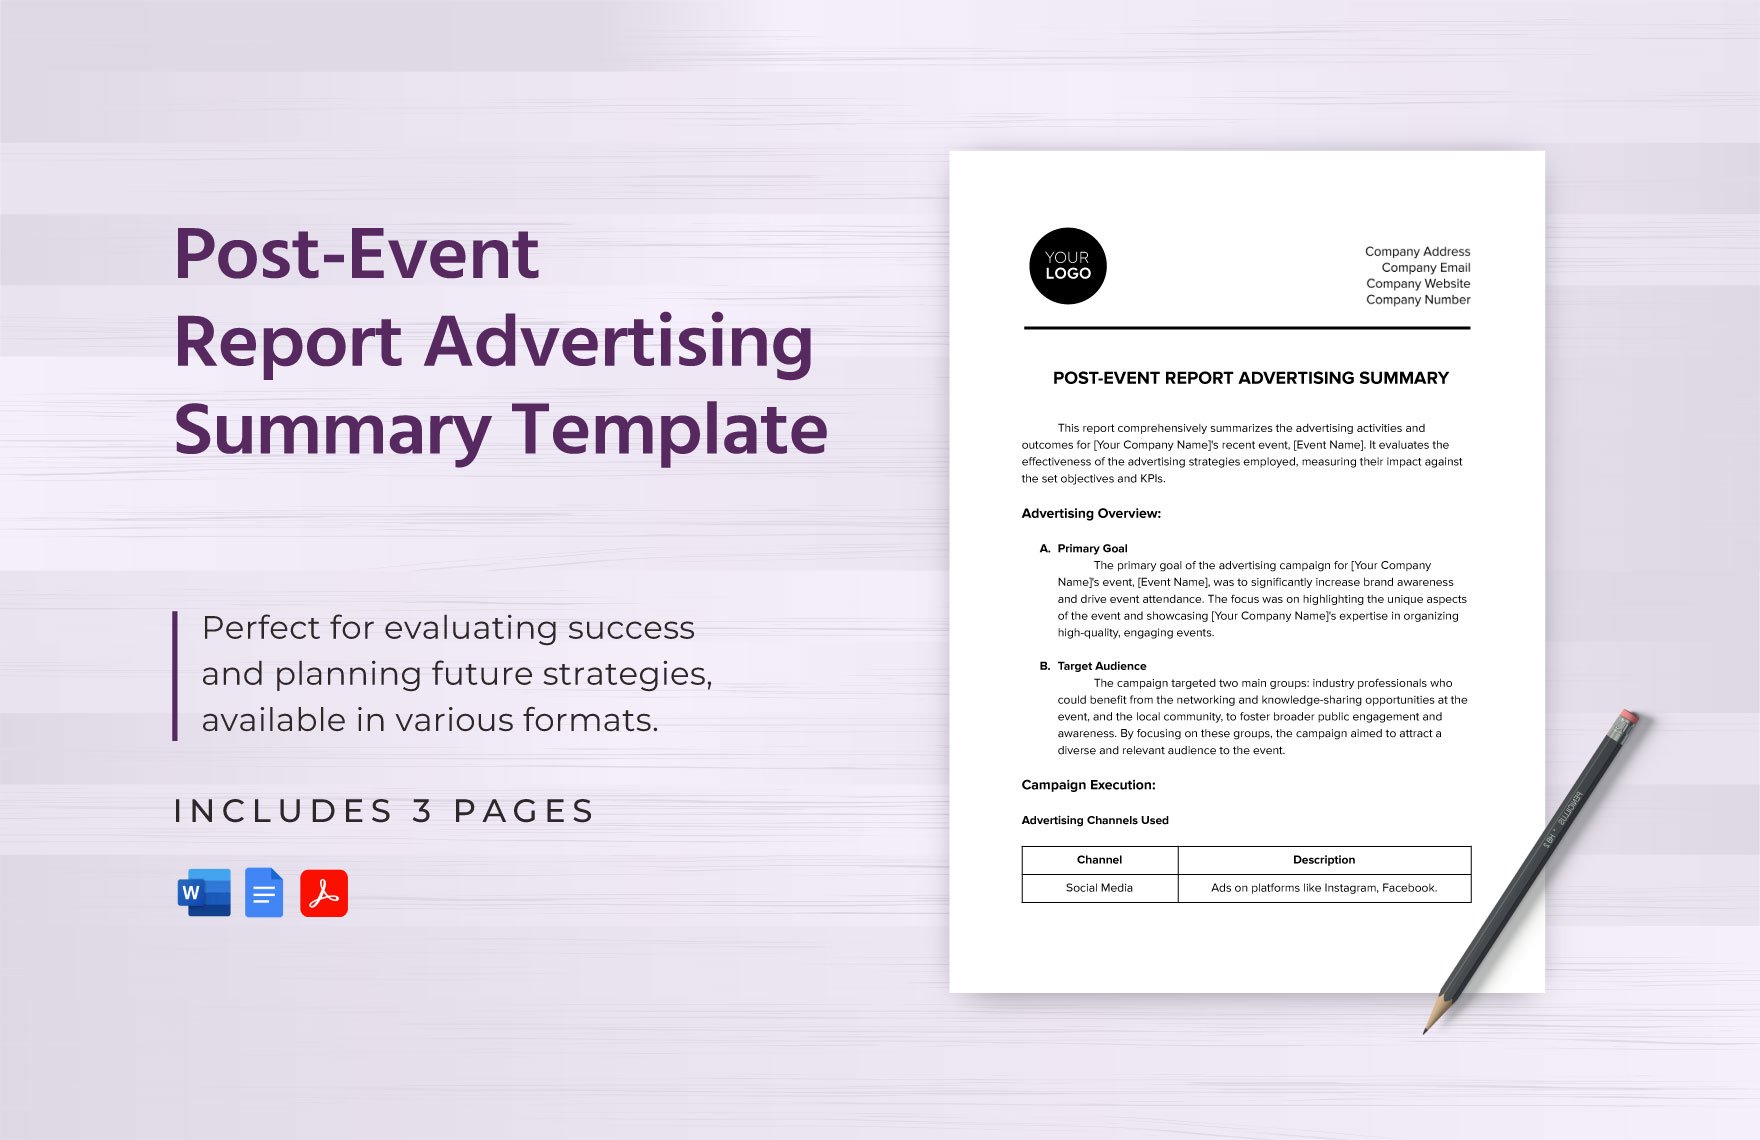 Post-Event Report Advertising Summary Template